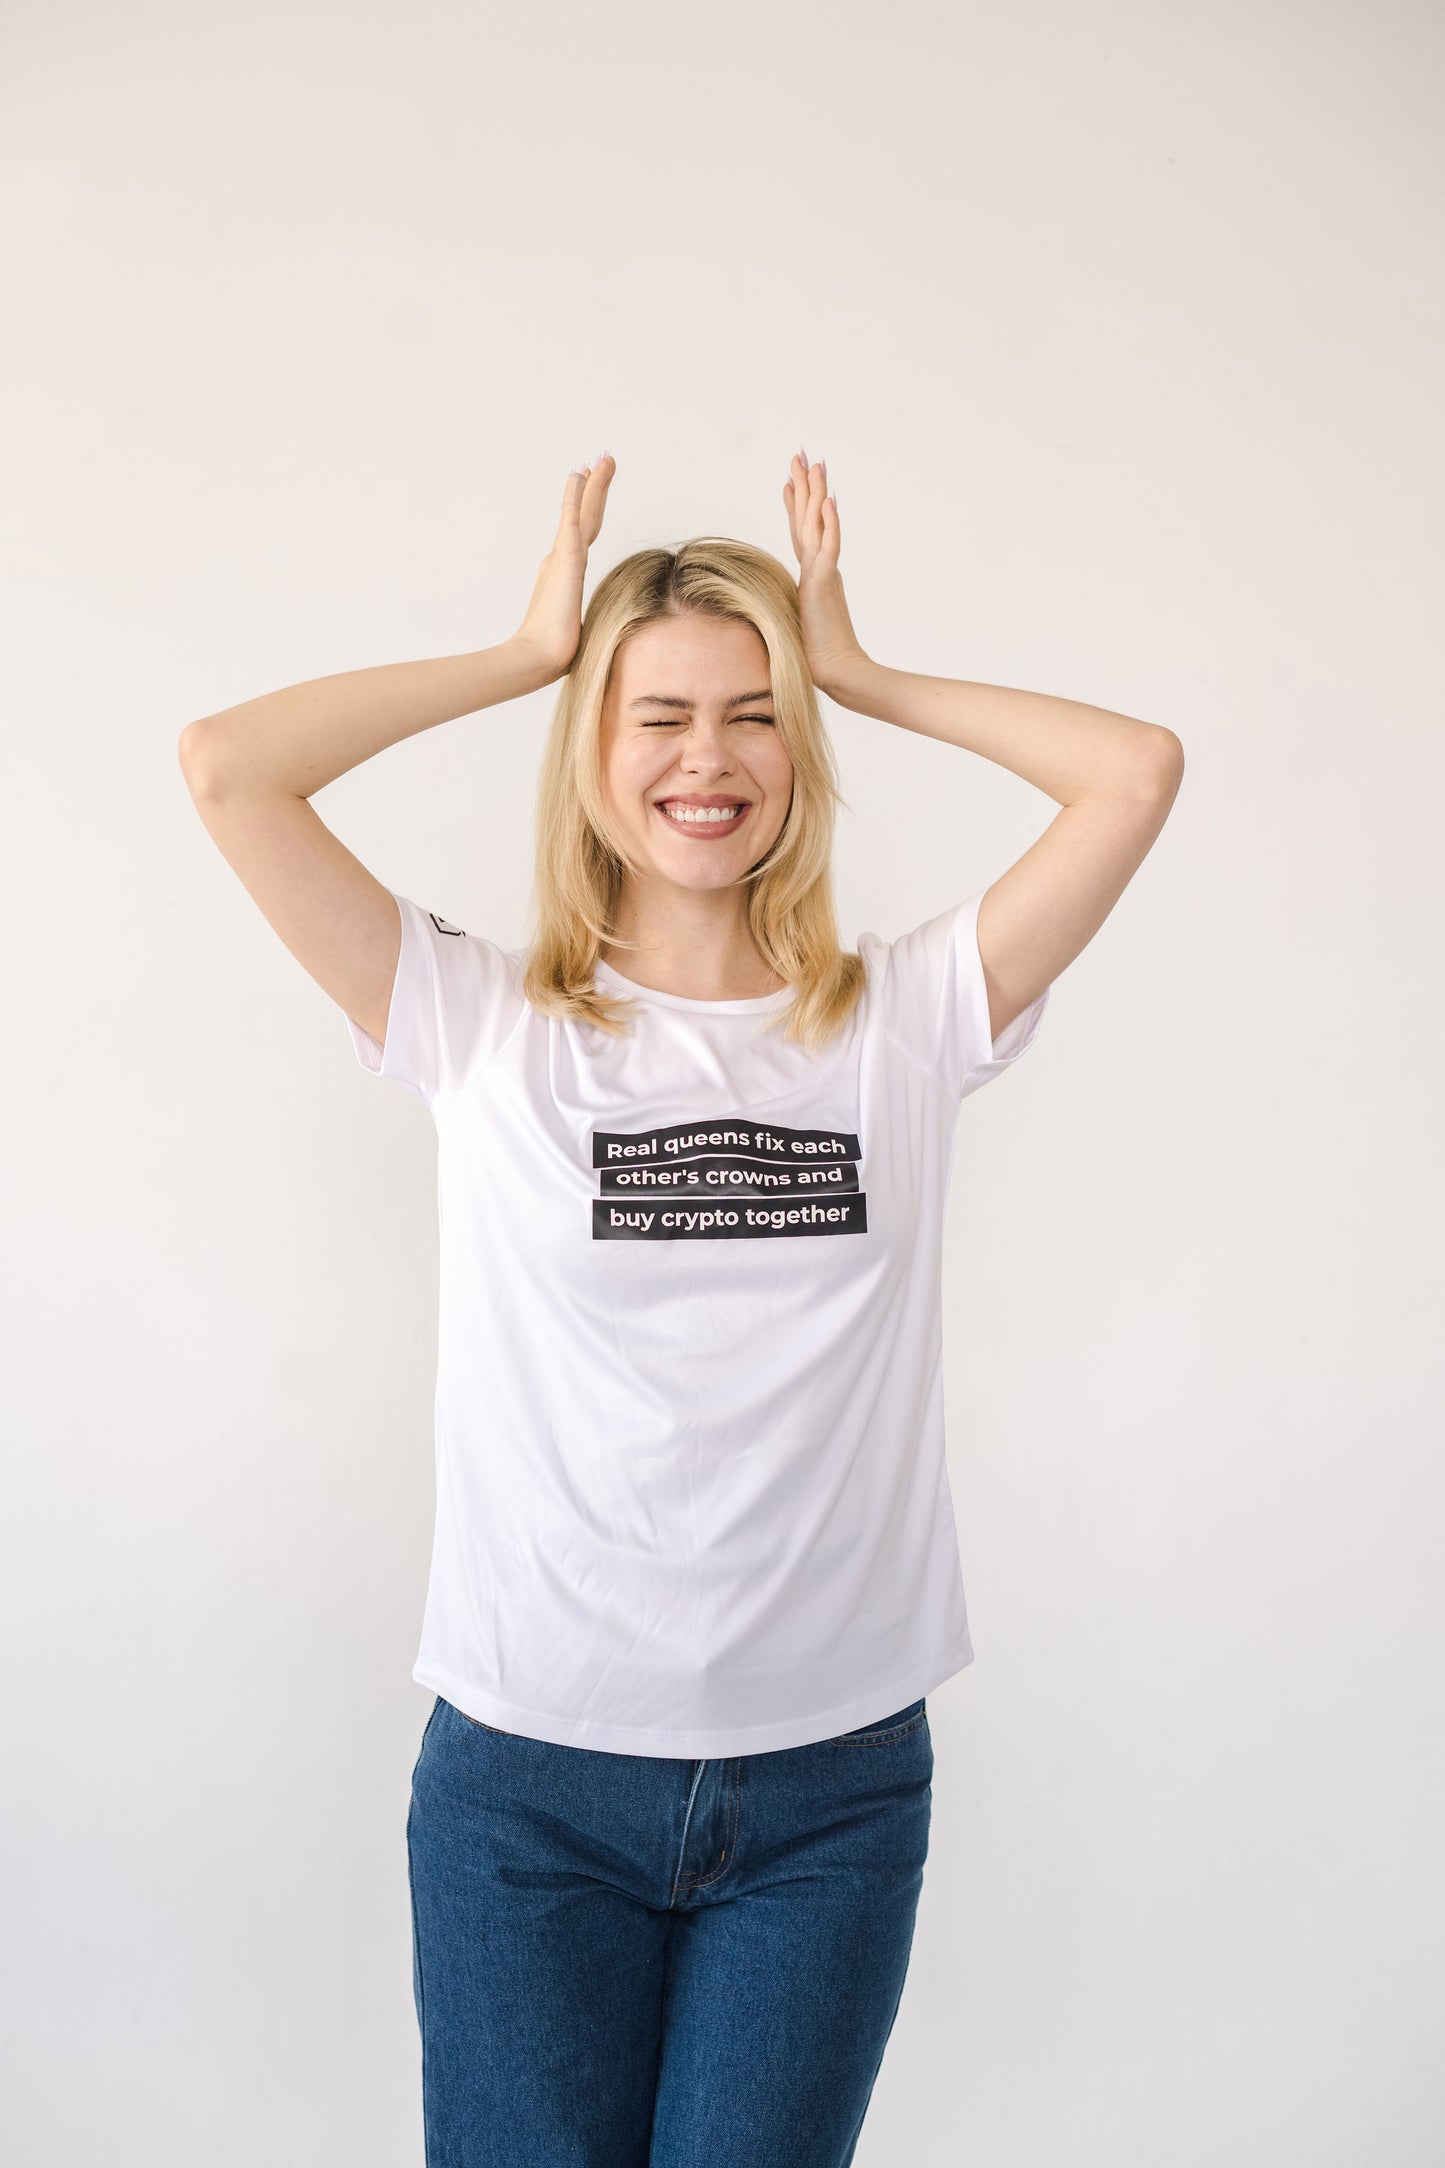 Real queens fix each others crown and buy  crypto together, Tshirt for crypto users,  Tshirt for crypto users, Upgrade your wardrobe with our luxurious premium organic cotton tees, crafted for unbeatable comfort and timeless elegance. Made from 100% organic cotton, these short-sleeve tees are machine washable for easy care. Enjoy a soft touch and elevate your everyday style effortlessly.